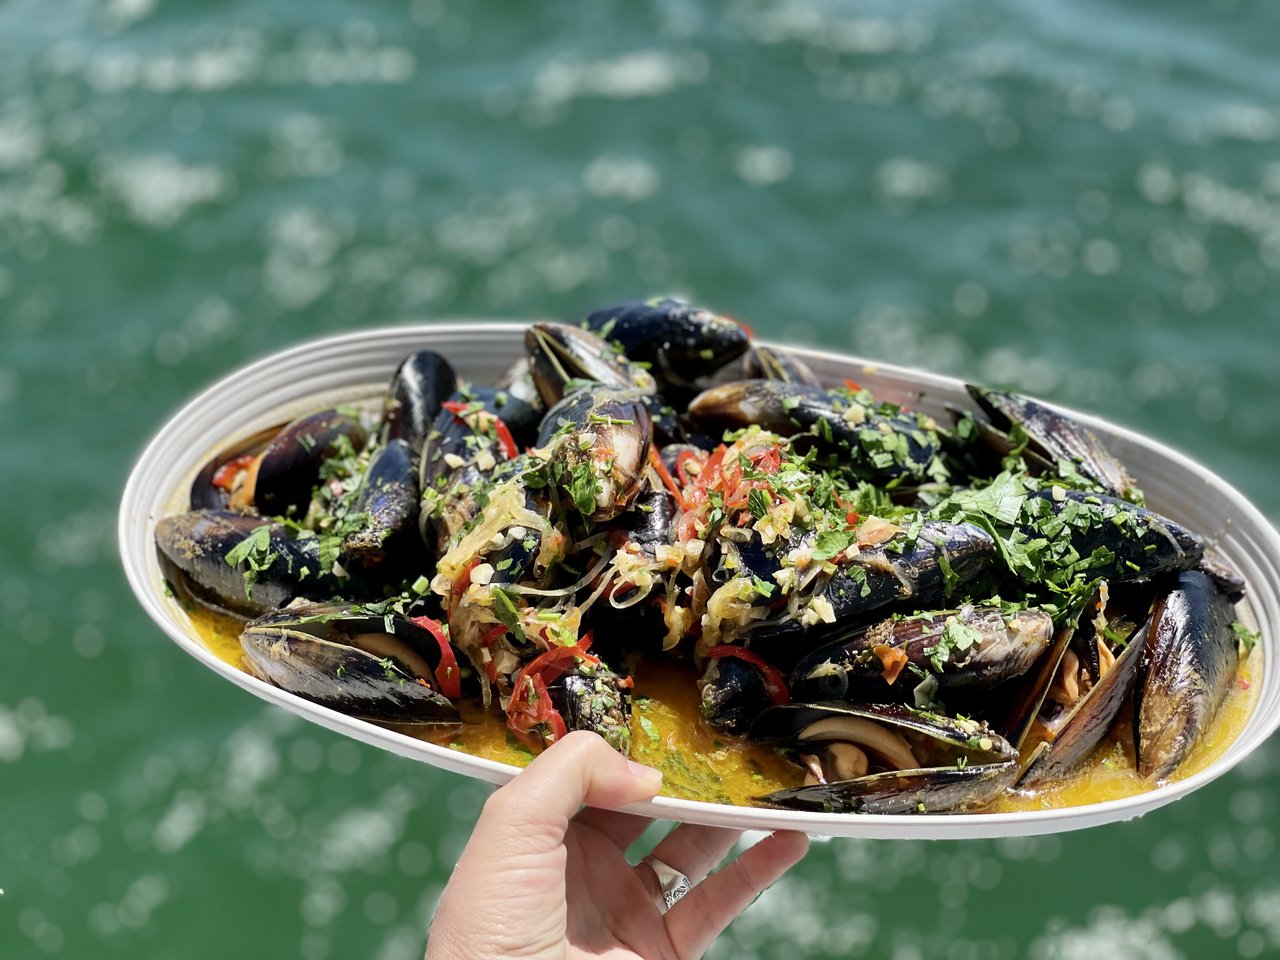 Plate of mussels with ocean in the background